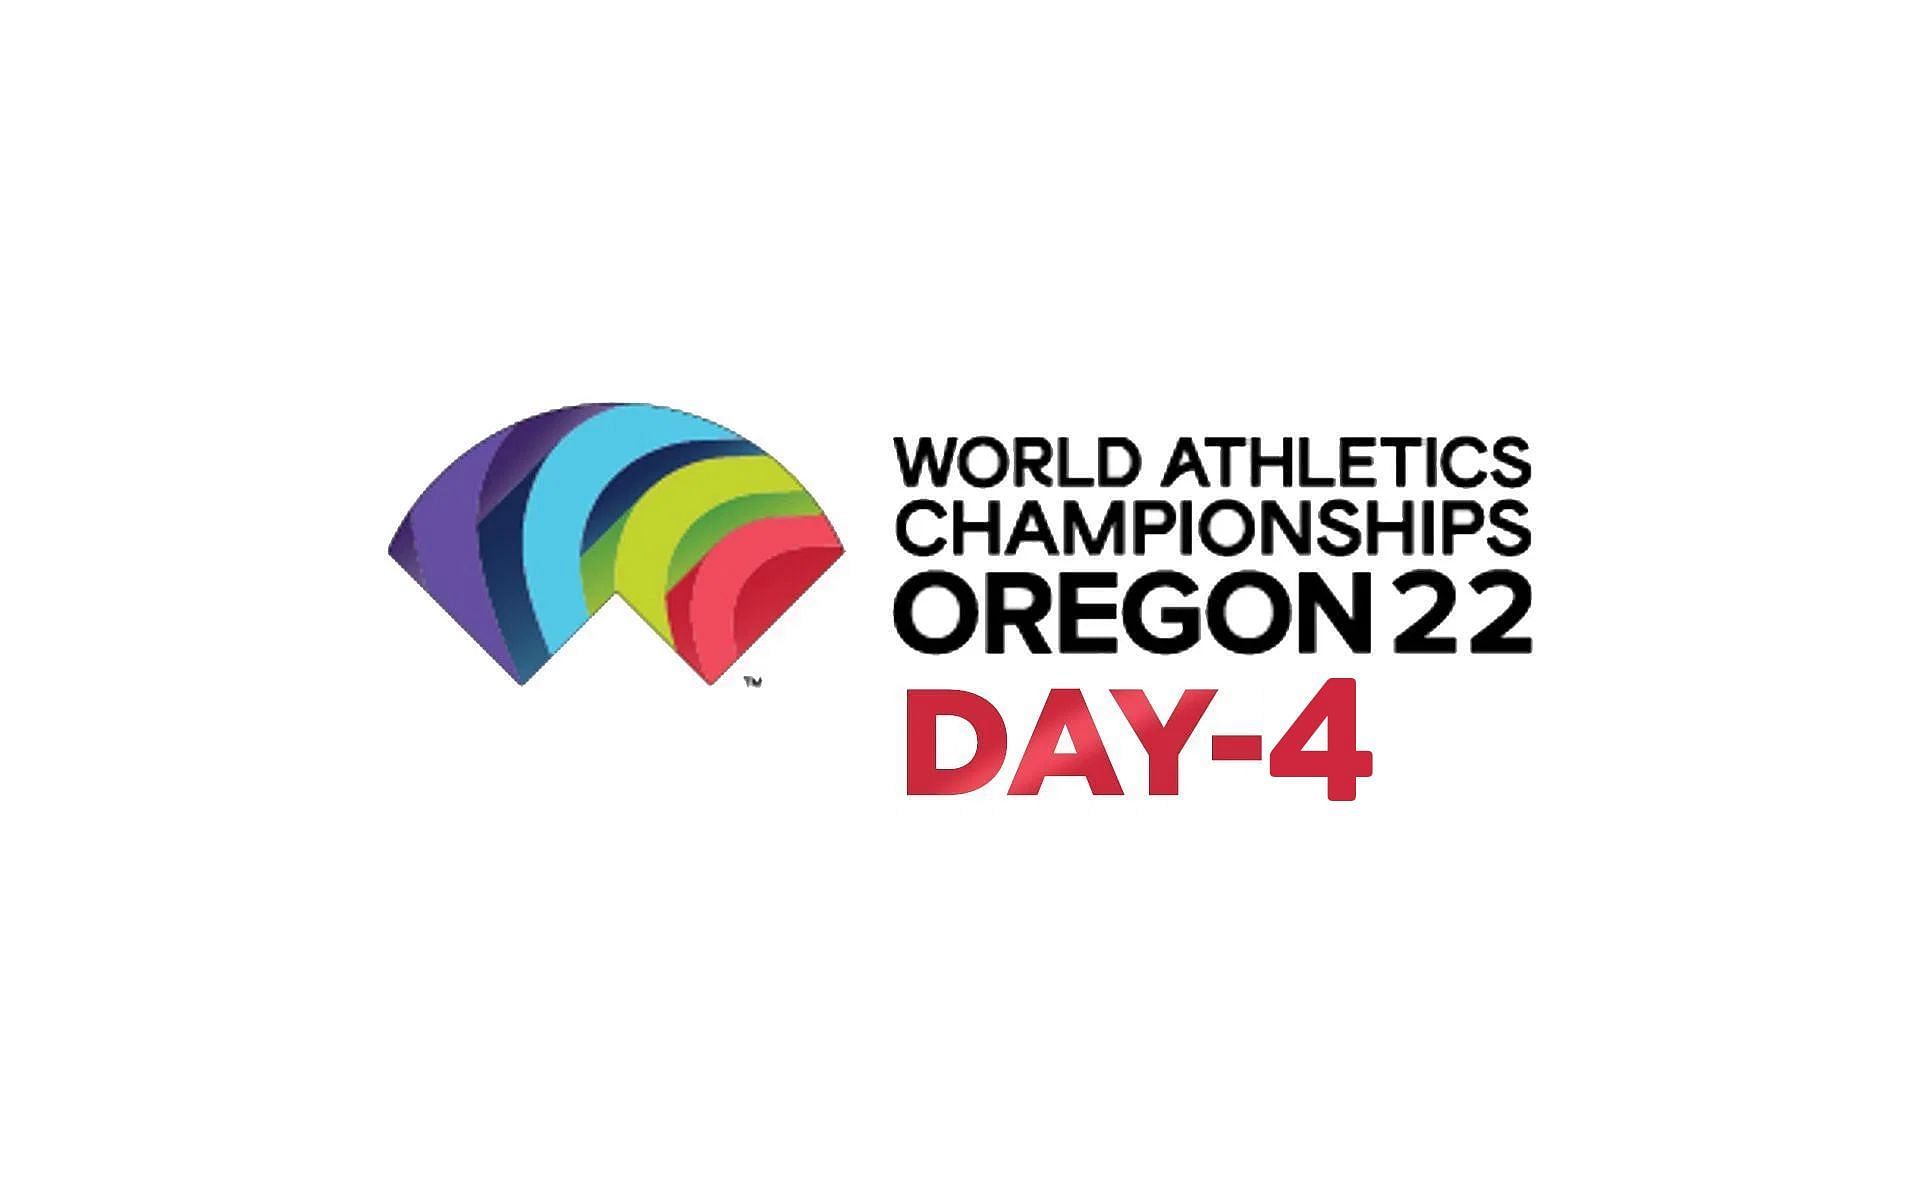 Day 4 of the World Athletics Championships will take place on July 18, 2022 (Image via Sportskeeda)